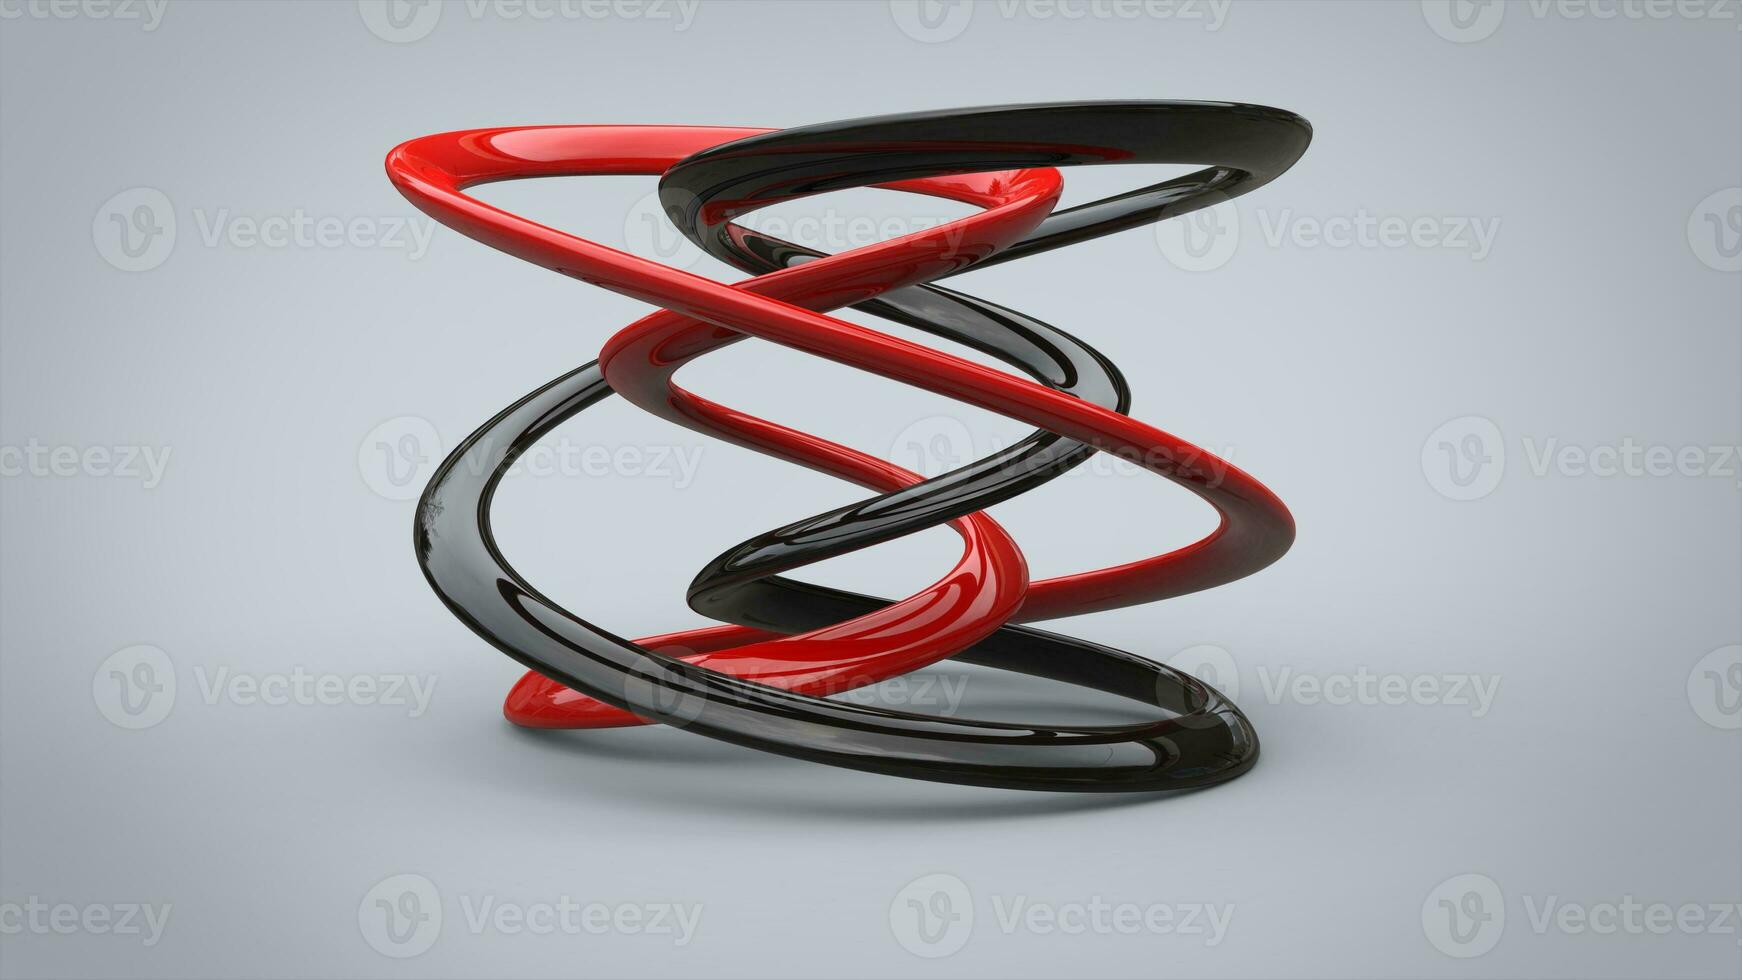 Abstract black and red minimalist sculpture - closeup photo